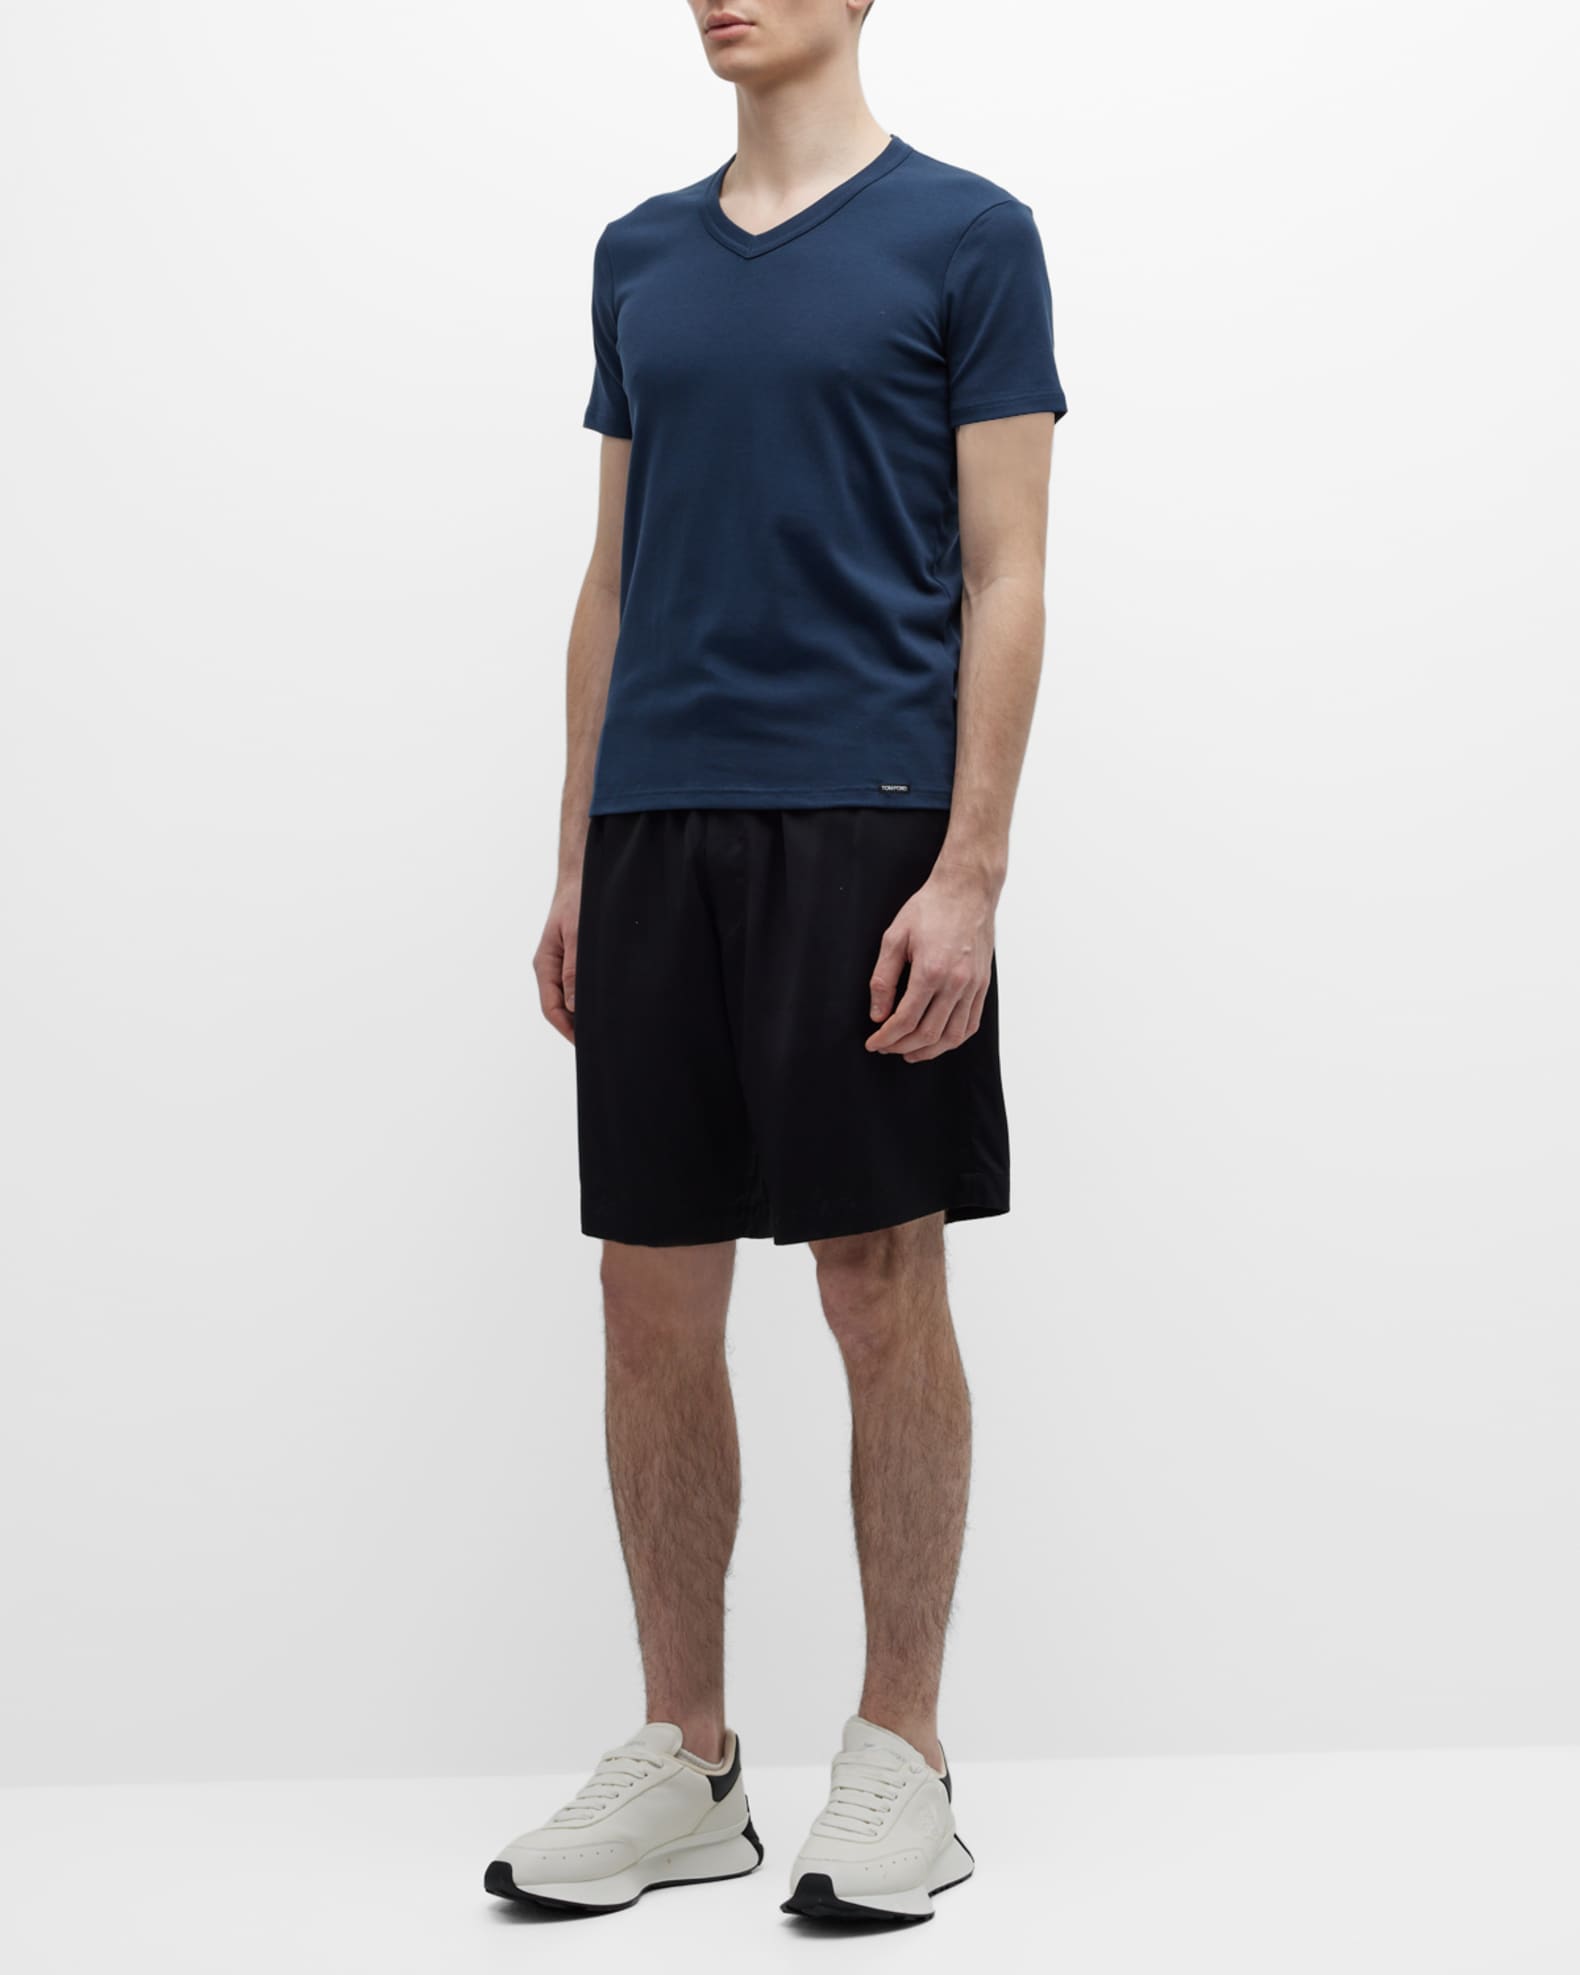 TOM FORD Men's Cotton Stretch Jersey T-shirt | Neiman Marcus